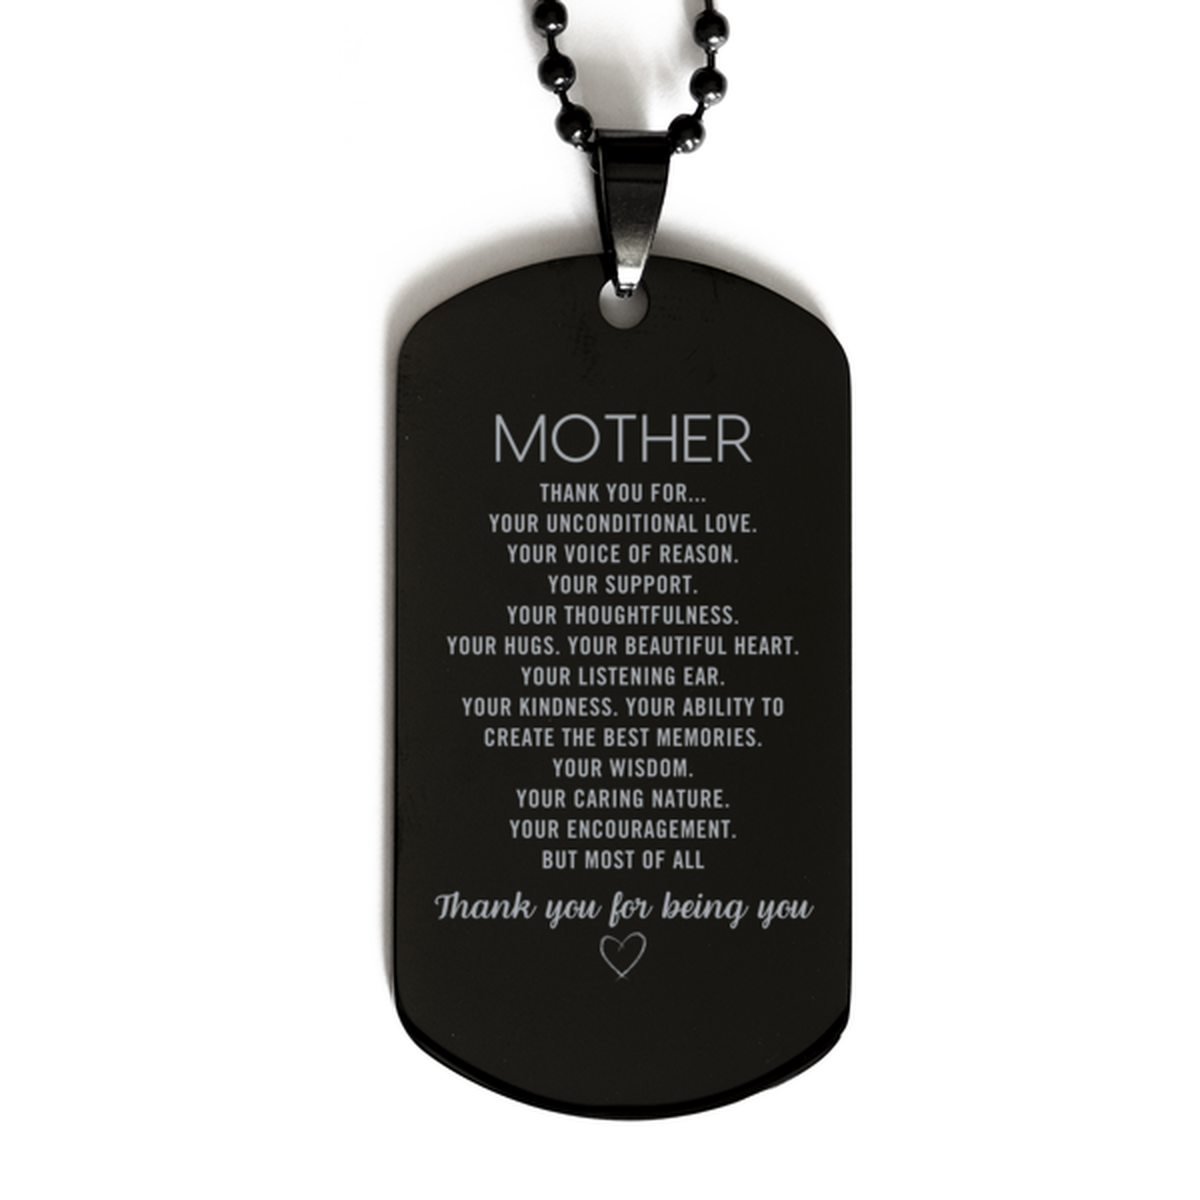 Mother Black Dog Tag Custom, Engraved Gifts For Mother Christmas Graduation Birthday Gifts for Men Women Mother Thank you for Your unconditional love